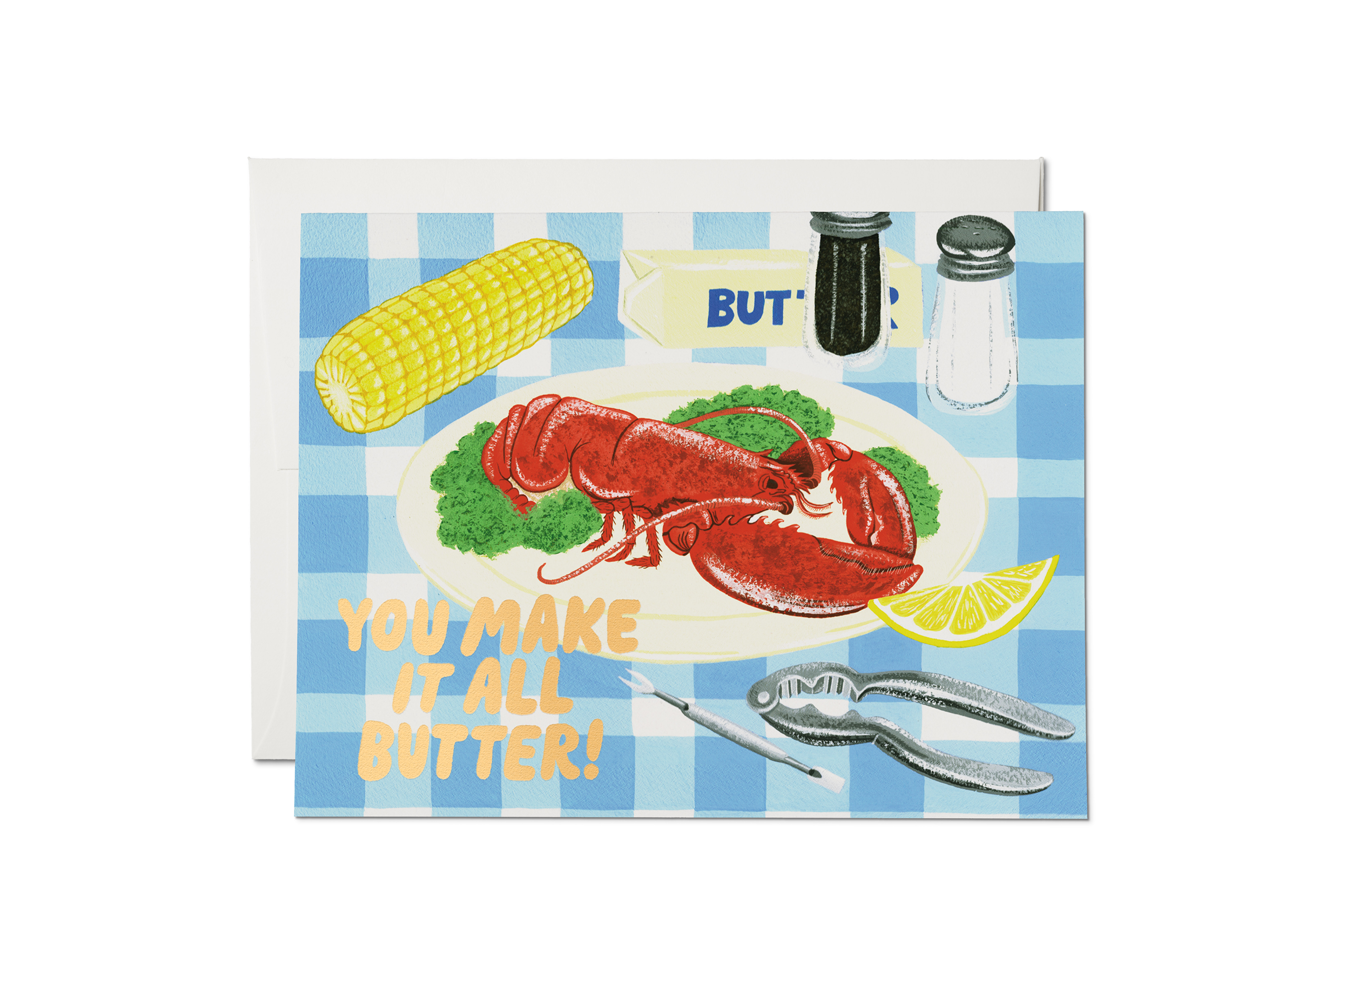 Lobster greeting card that reads "You Make It All Butter!" -- blue gingham background with whole red lobster on a plate with an ear of corn, butter stick, salt & pepper, lemon wedge and shell cracking tools. 